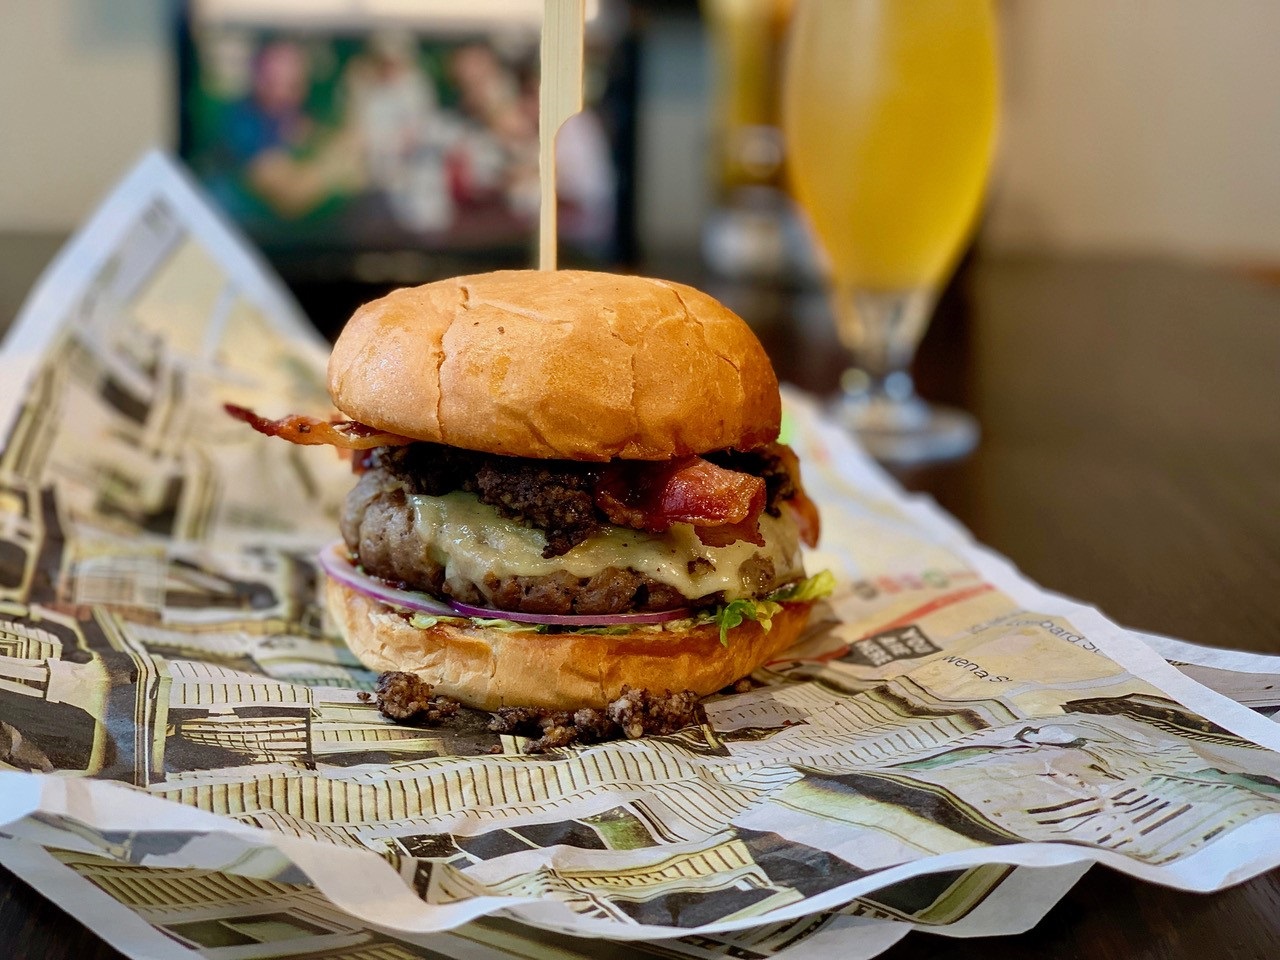 The Bonnie Burger will be available at Wahlburgers